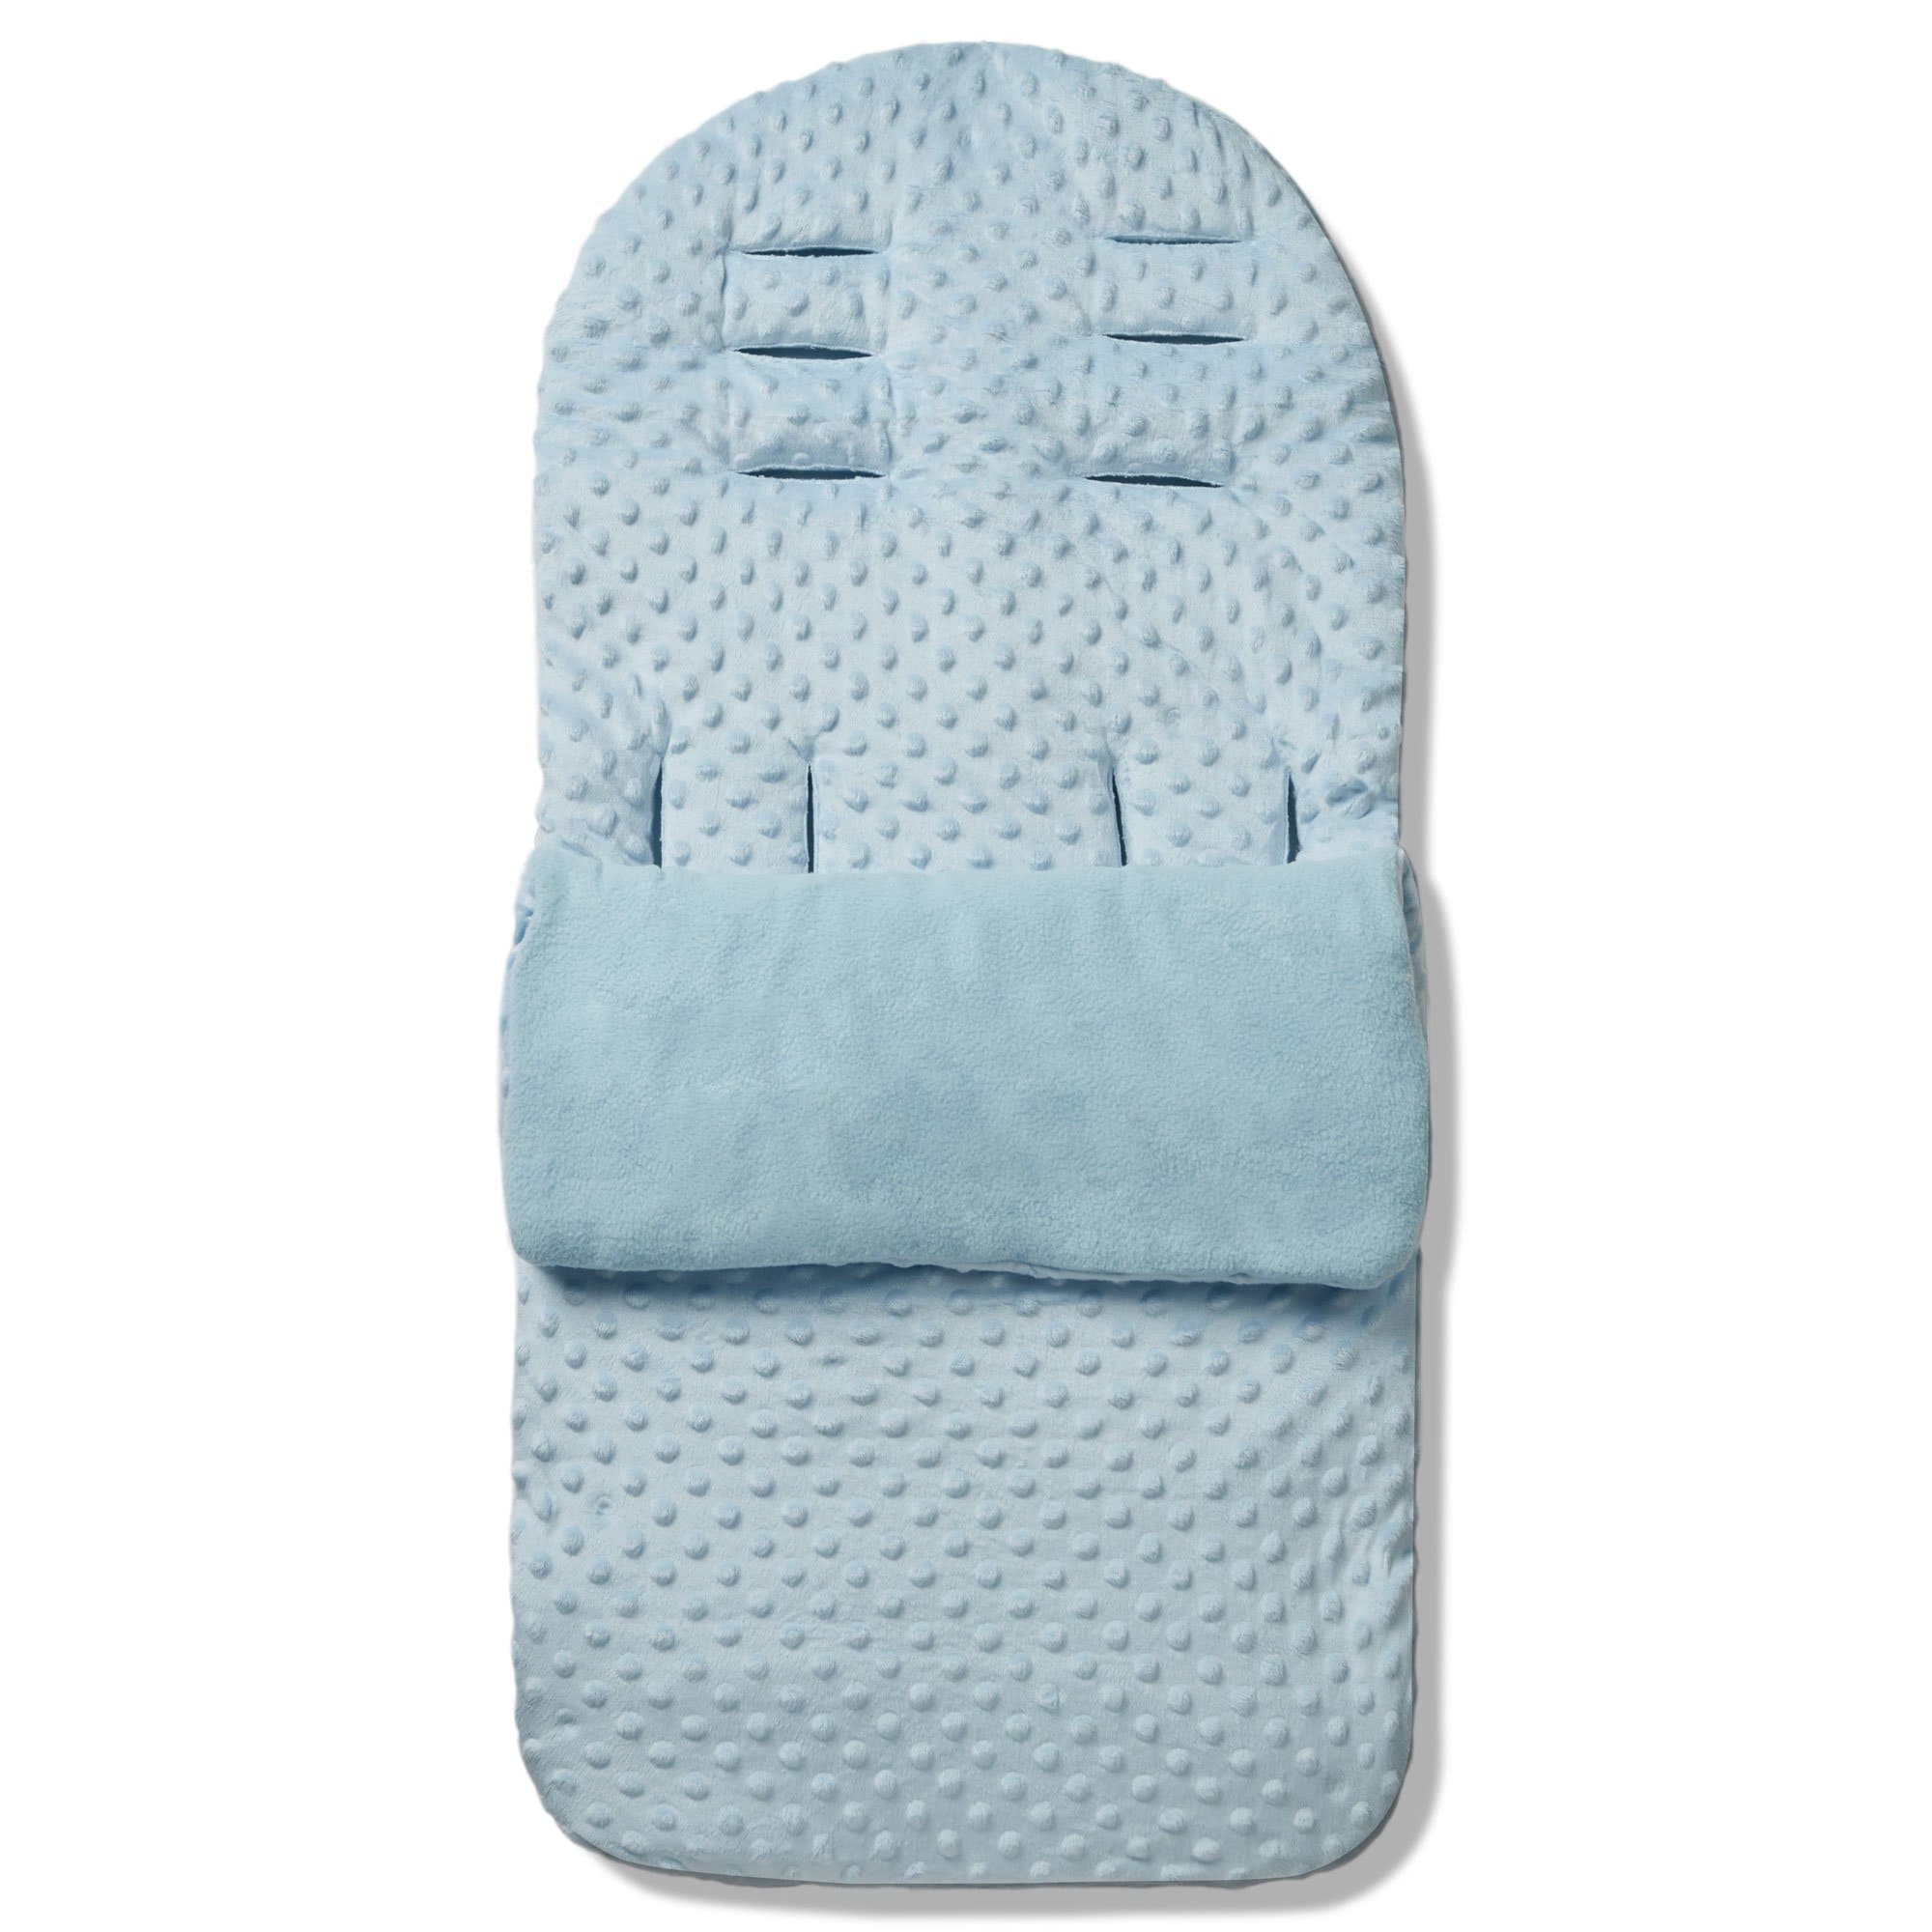 Dimple Footmuff / Cosy Toes Compatible with NeoNato - Blue / Fits All Models | For Your Little One